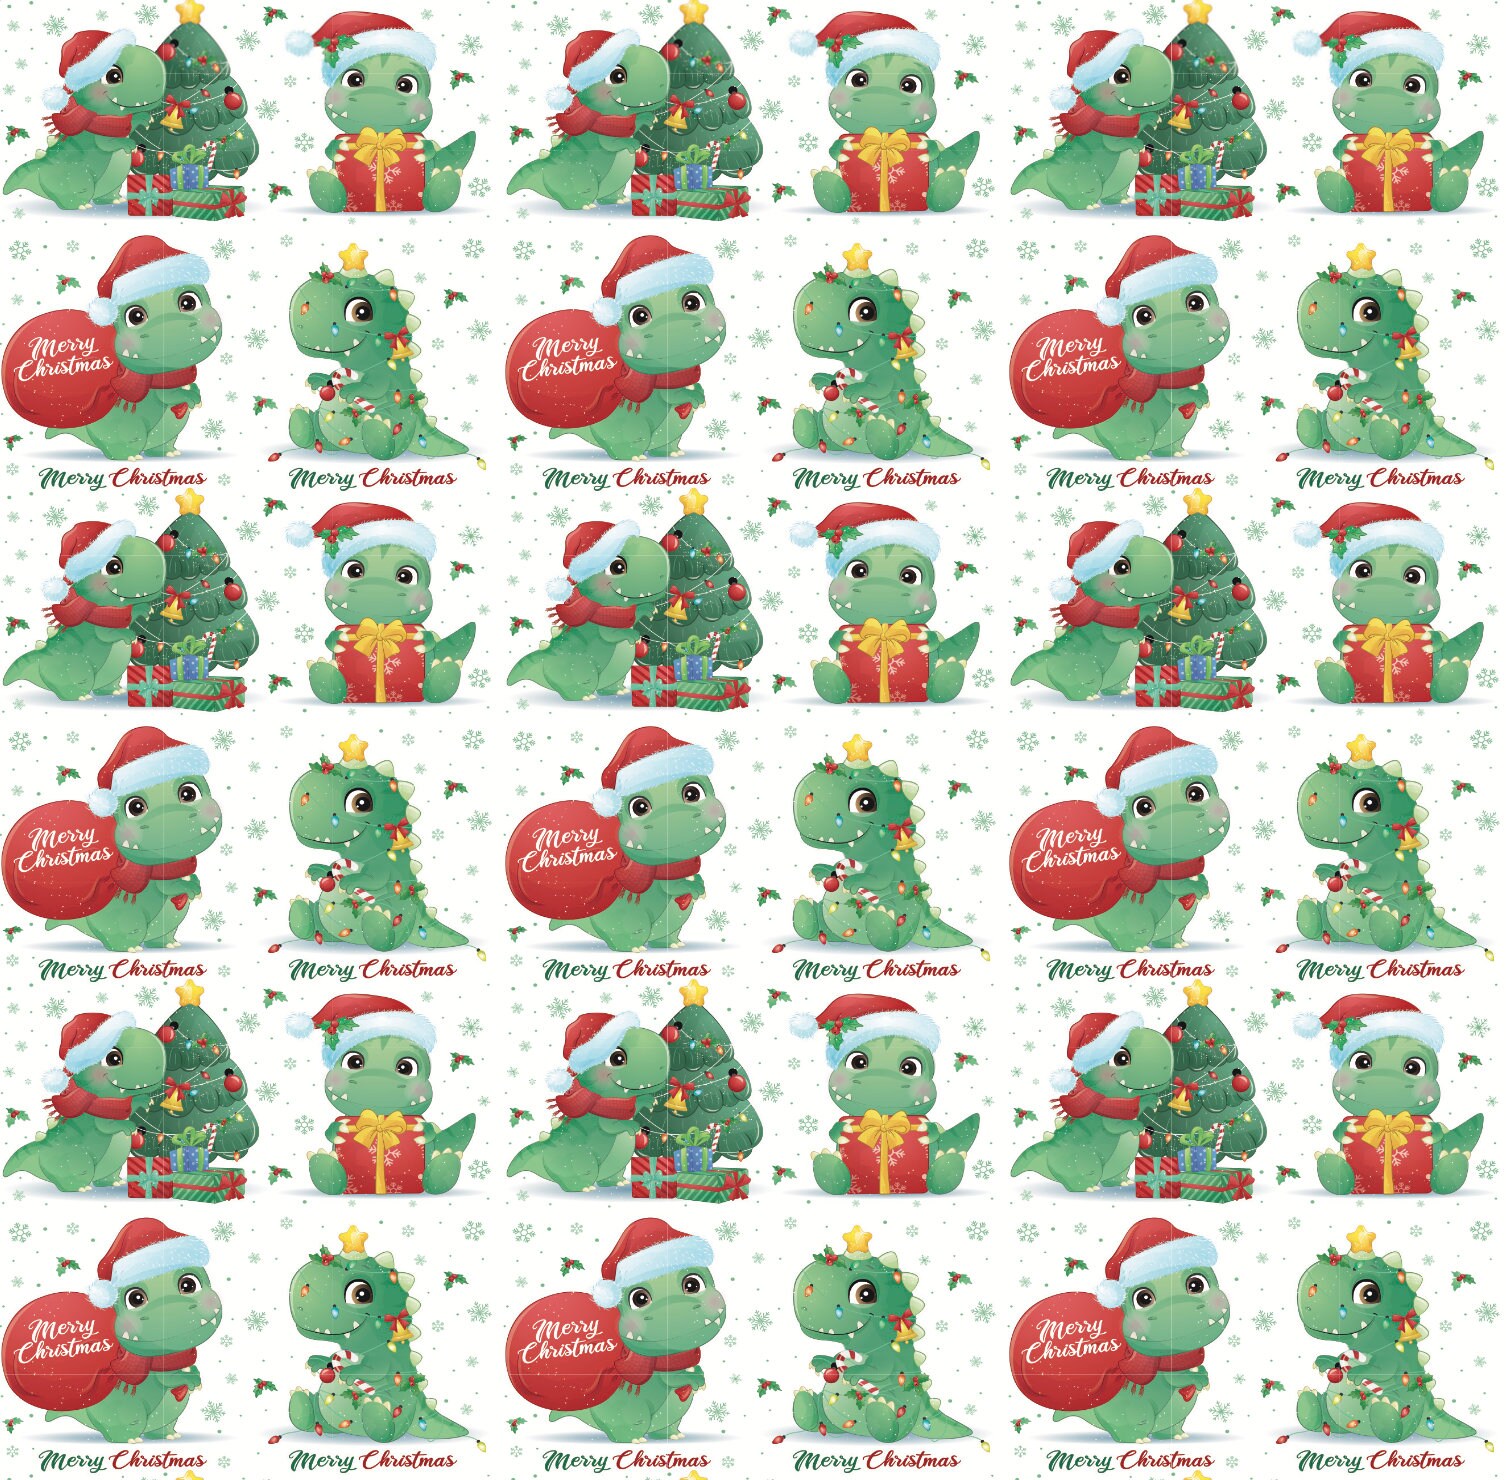 175 Sq. Ft. Reversible Black Christmas Wrapping Paper for Kids, Dinosaurs,  Yetis